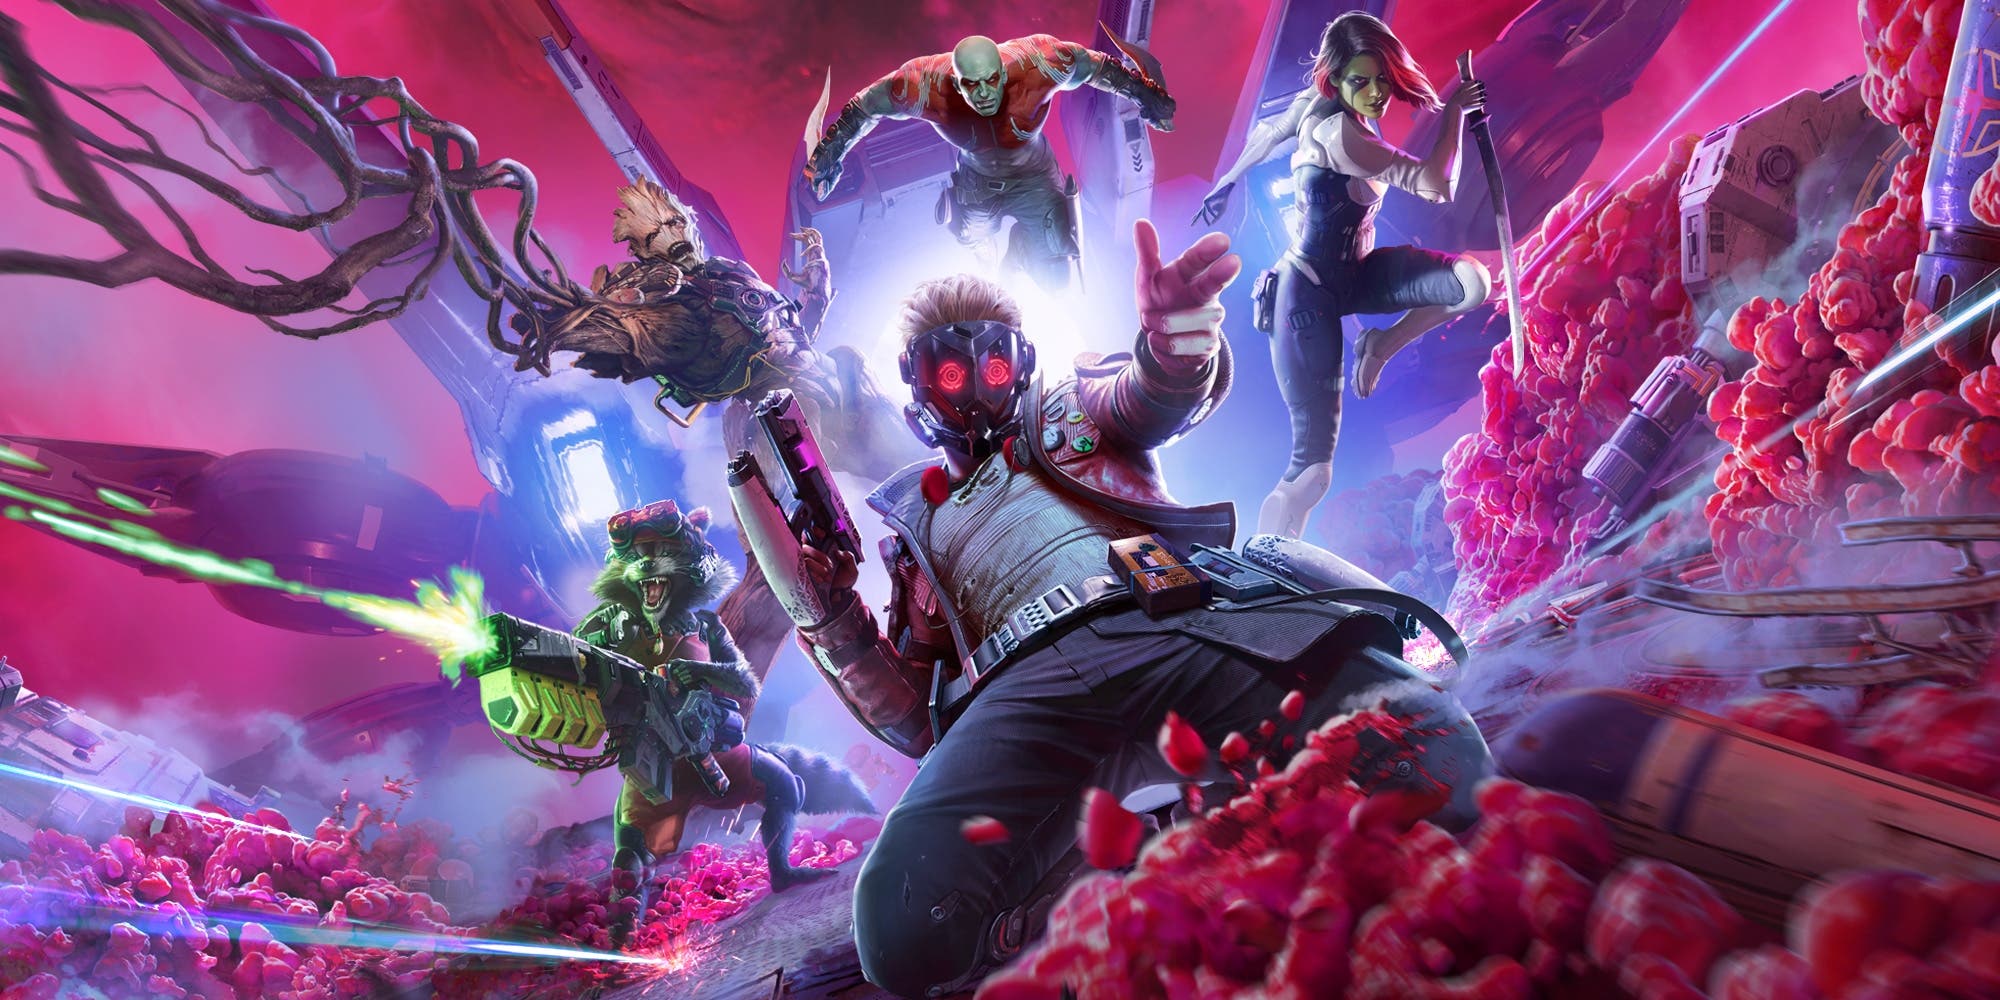 Nintendo confirma Marvel’s Guardians of the Galaxy para Switch